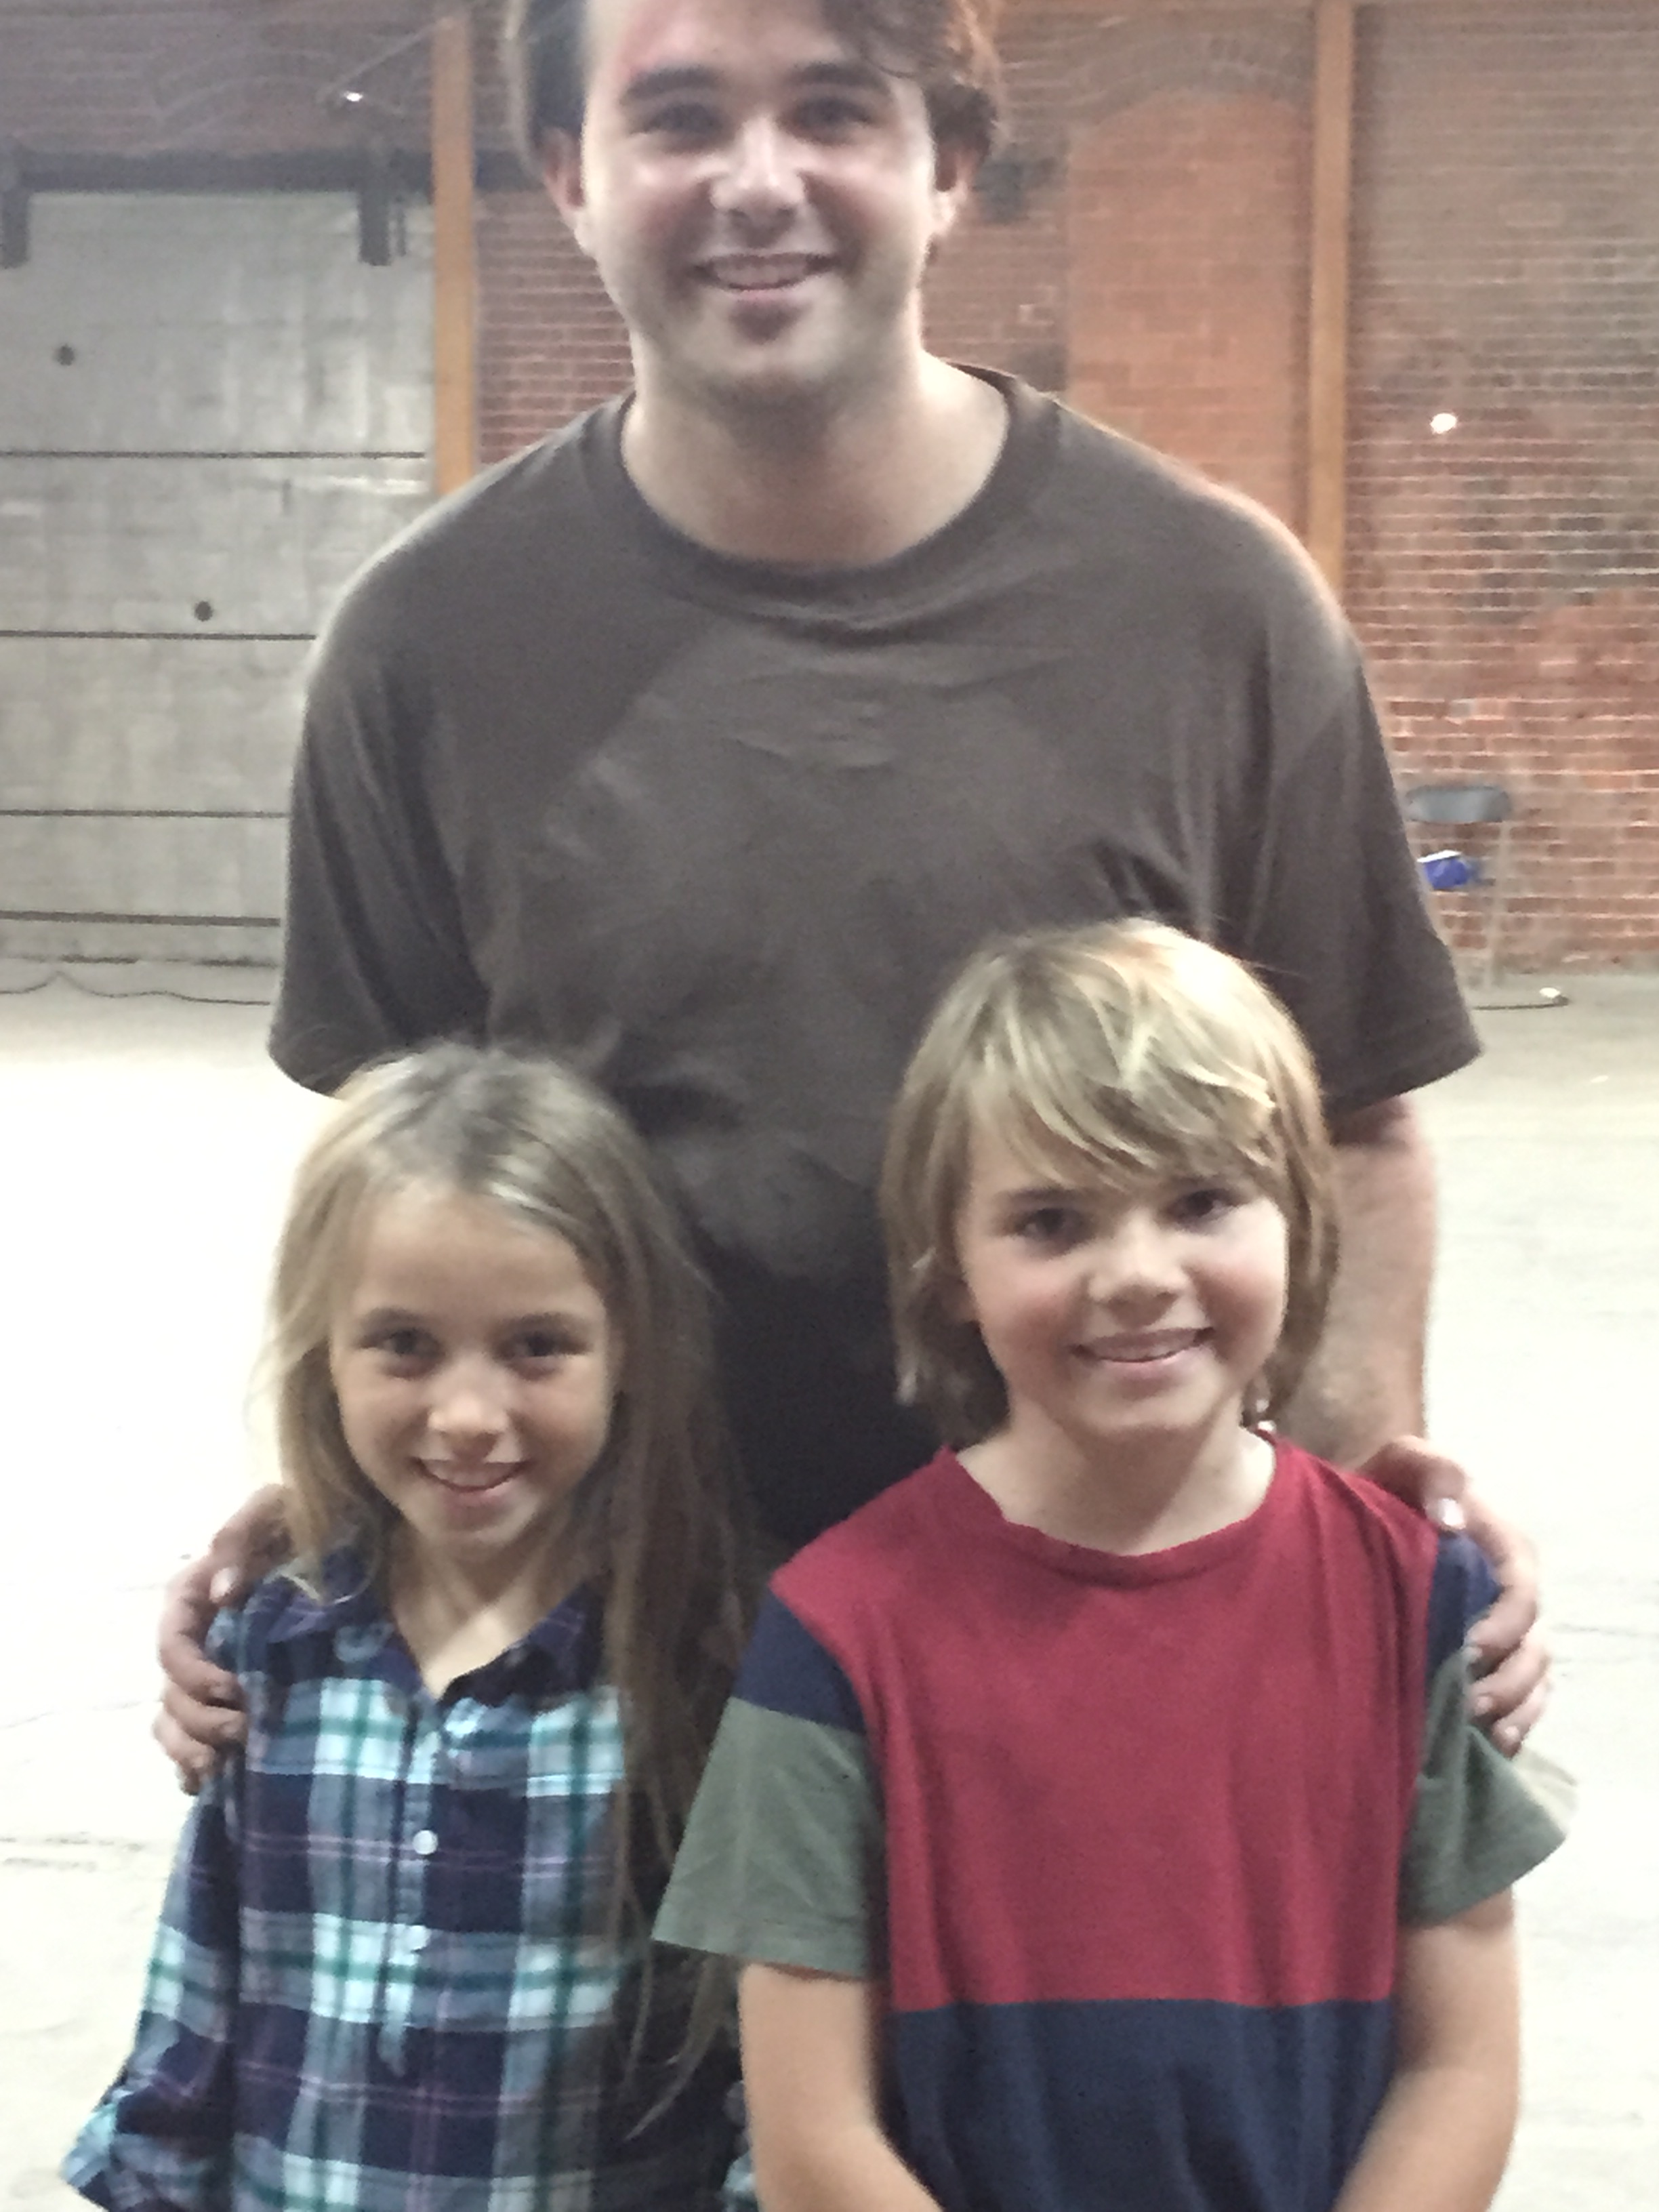 Best Big Brother ever Hutch Dano!!